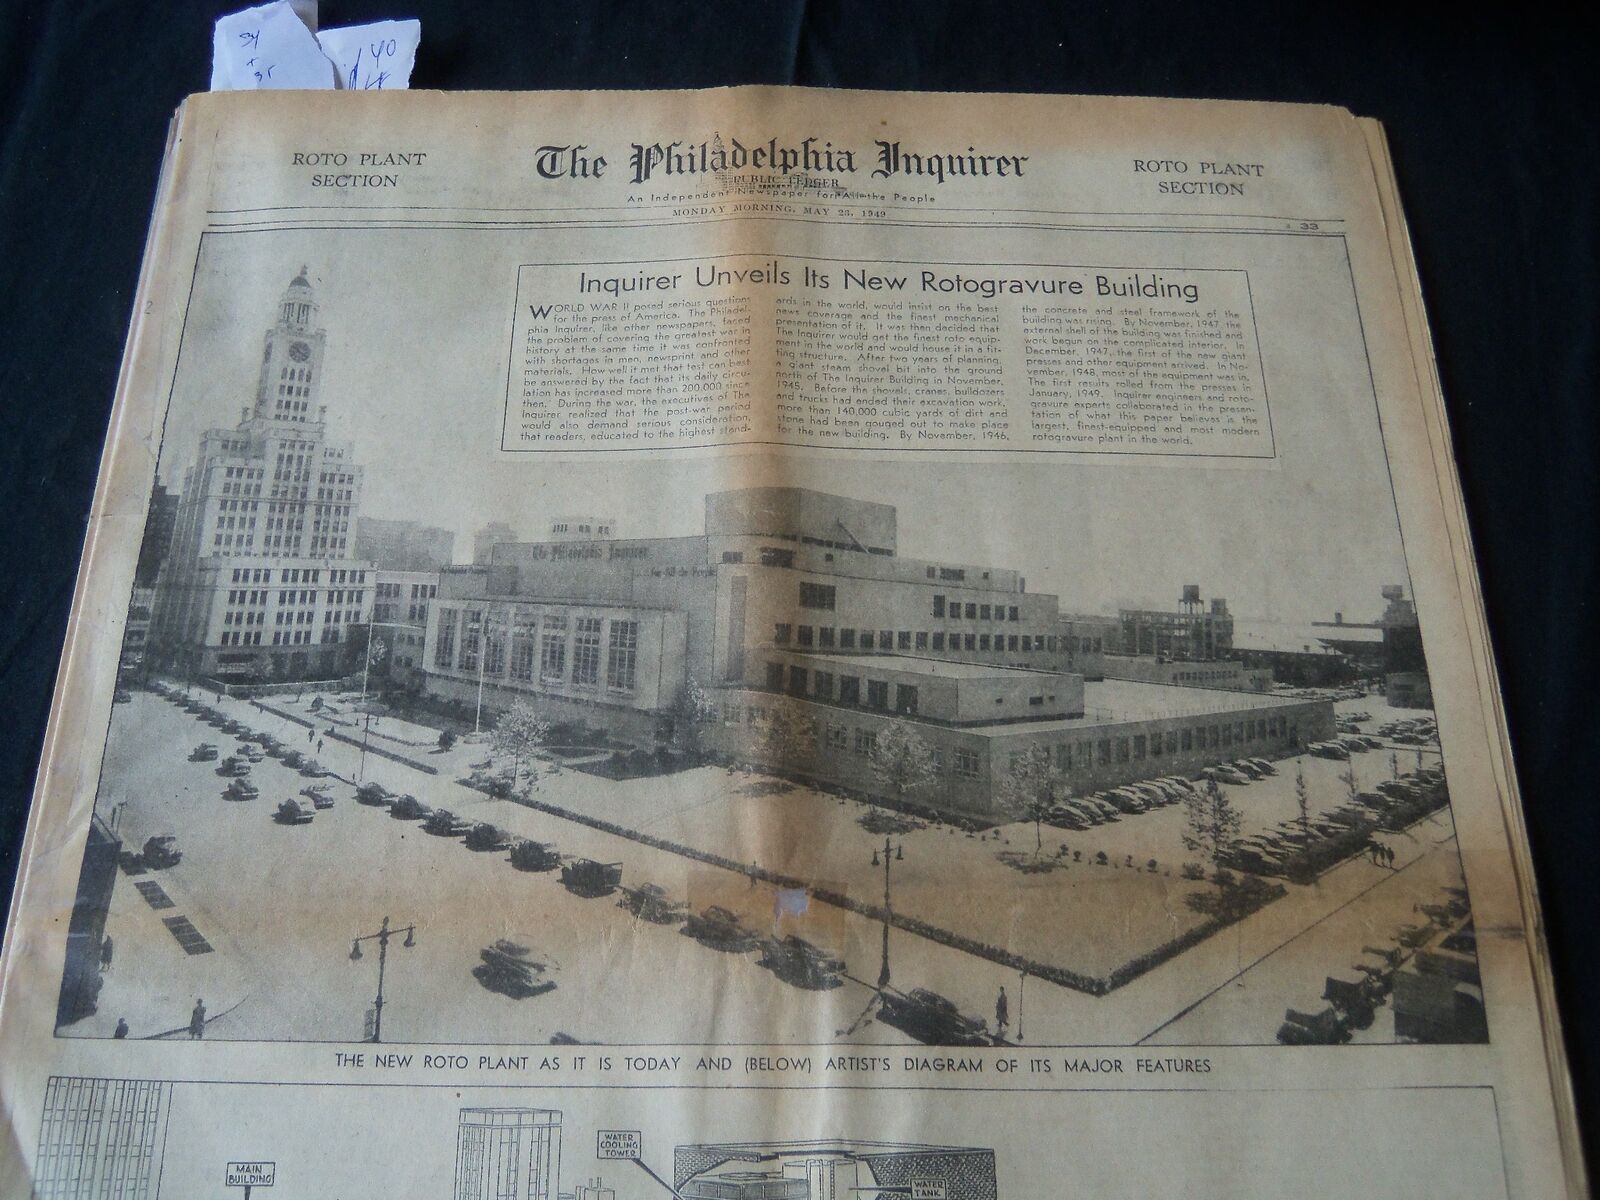 1949 MAY 23 PHILADELPHIA INQUIRER NEWSPAPER - NEW ROTOGRAVURE BUILDING - NT 7253